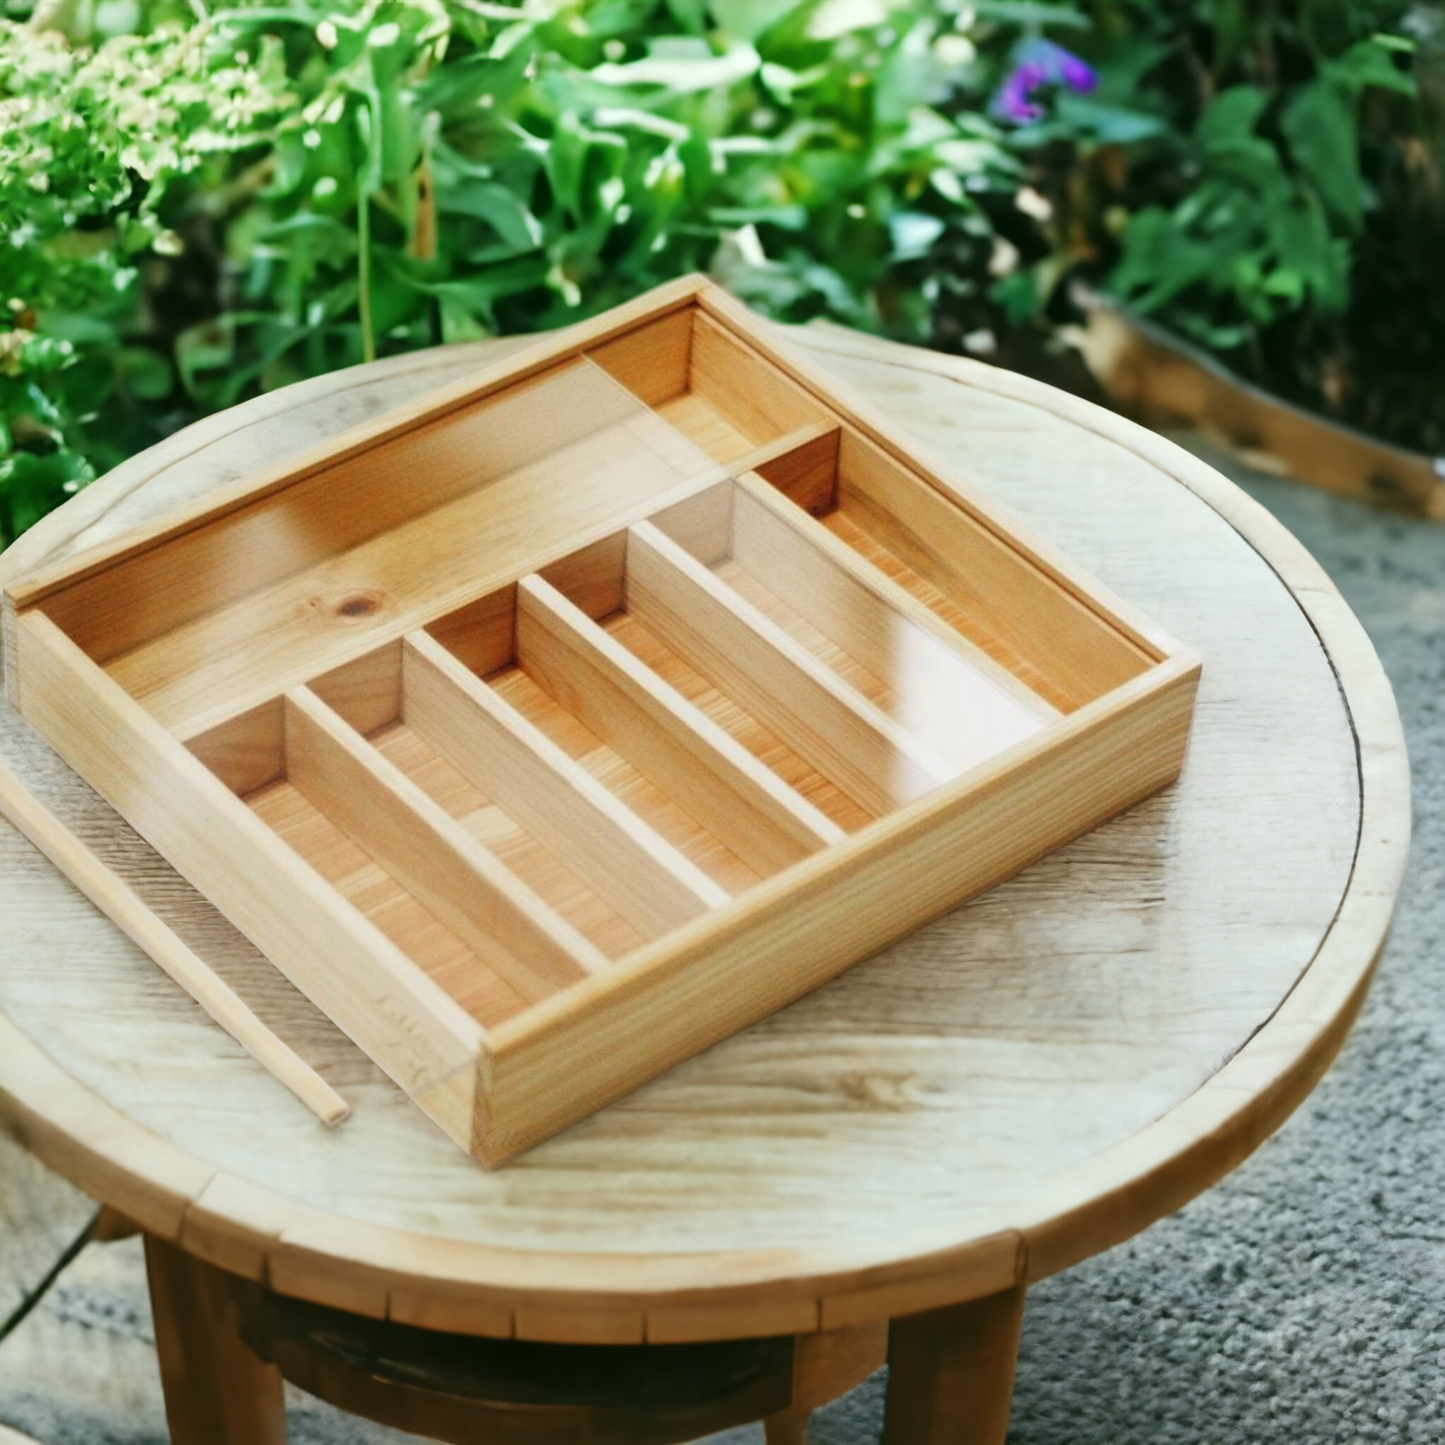 Loose Part Storage Tray with Lid